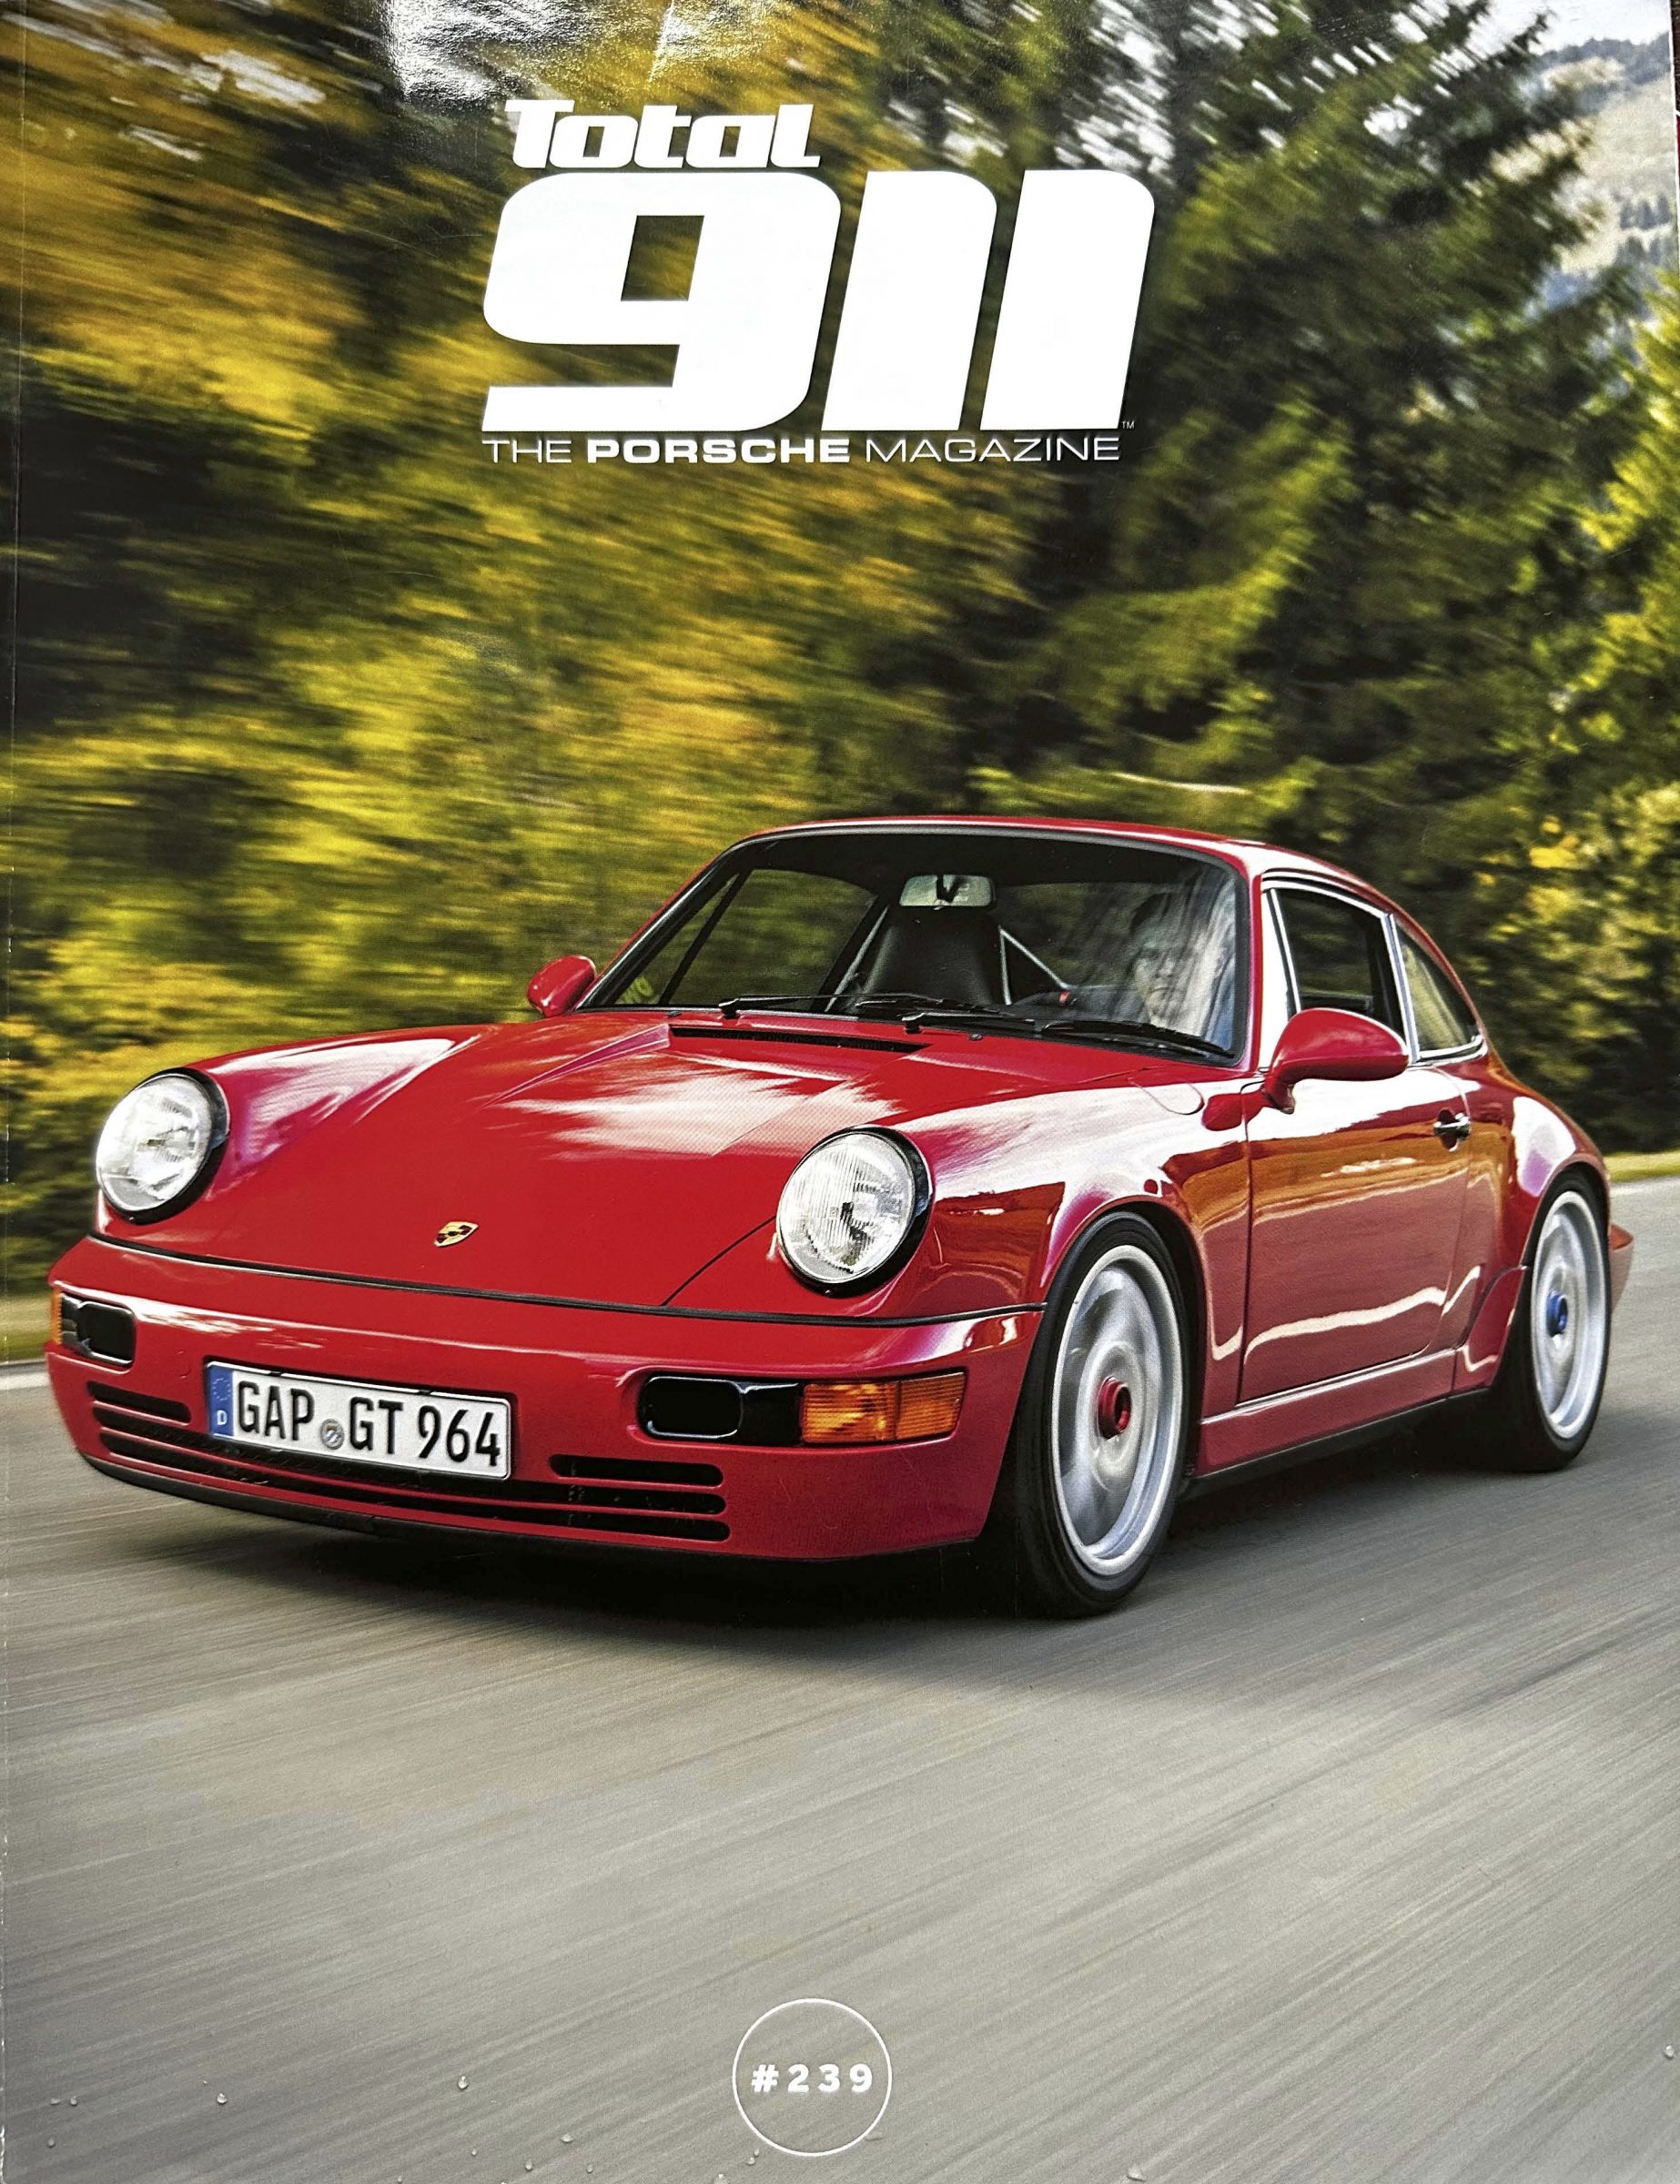 Featured image for “The Game Changer – Total 911 The Porsche Magazine #239 DRIVE REVIEW”